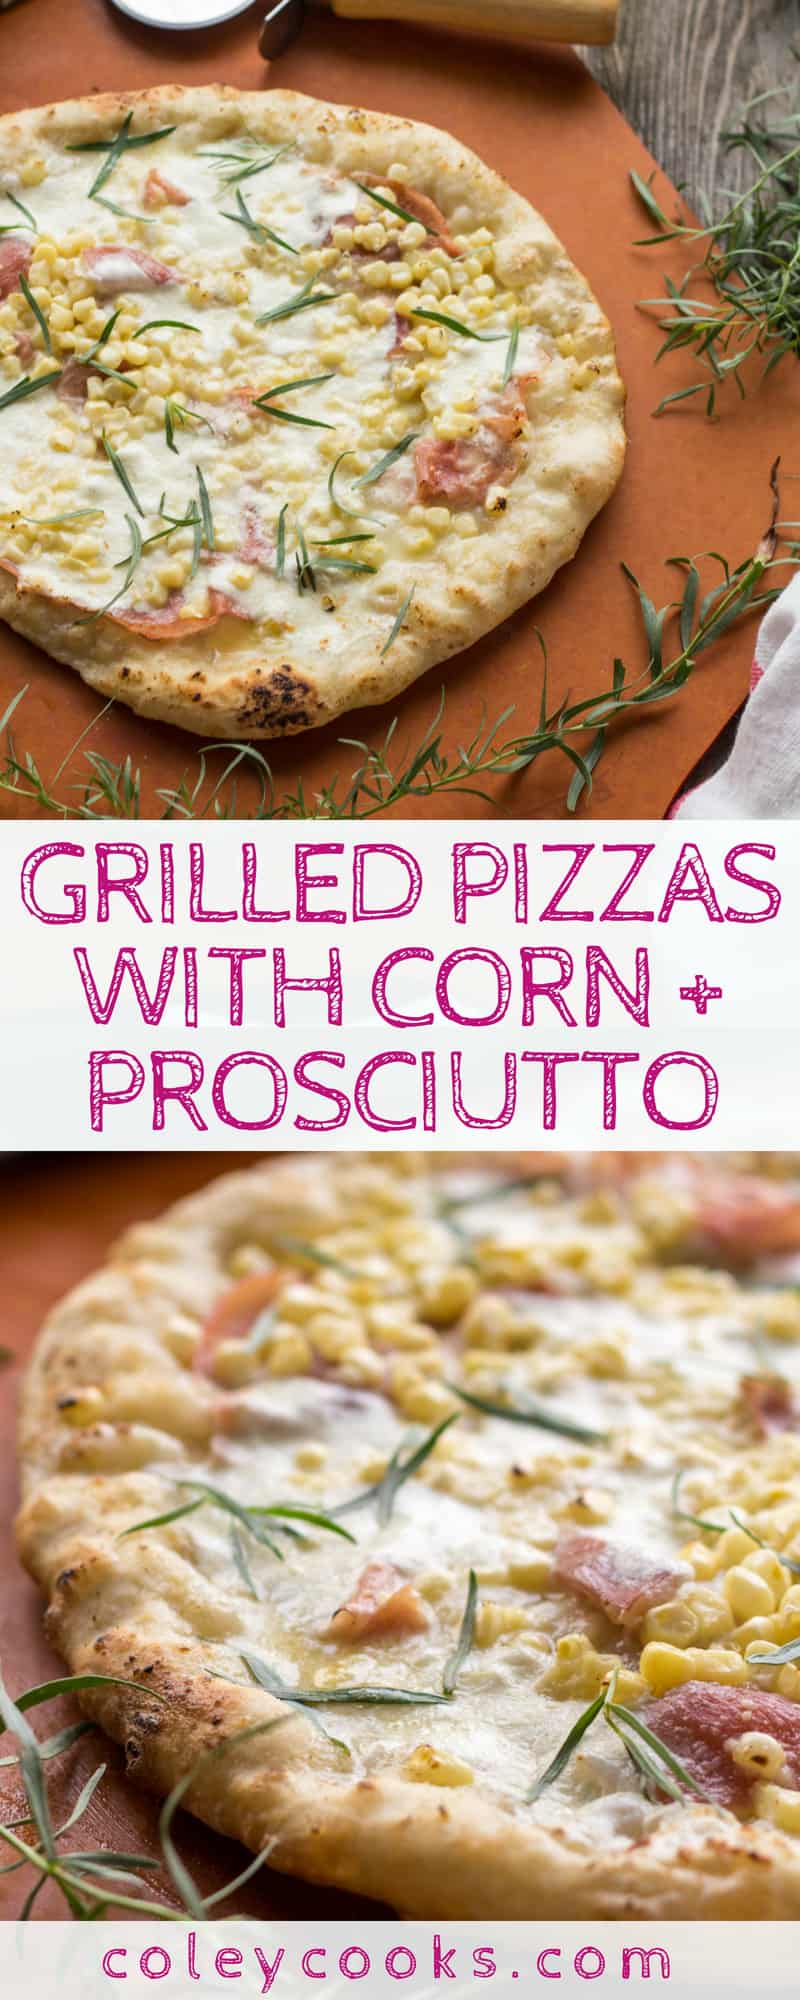 GRILLED PIZZAS with CORN + PROSCIUTTO | The best white pizza recipe with sweet summer corn and salty prosciutto, finished with tarragon! #recipe #pizza #summer #grilled #corn | ColeyCooks.com